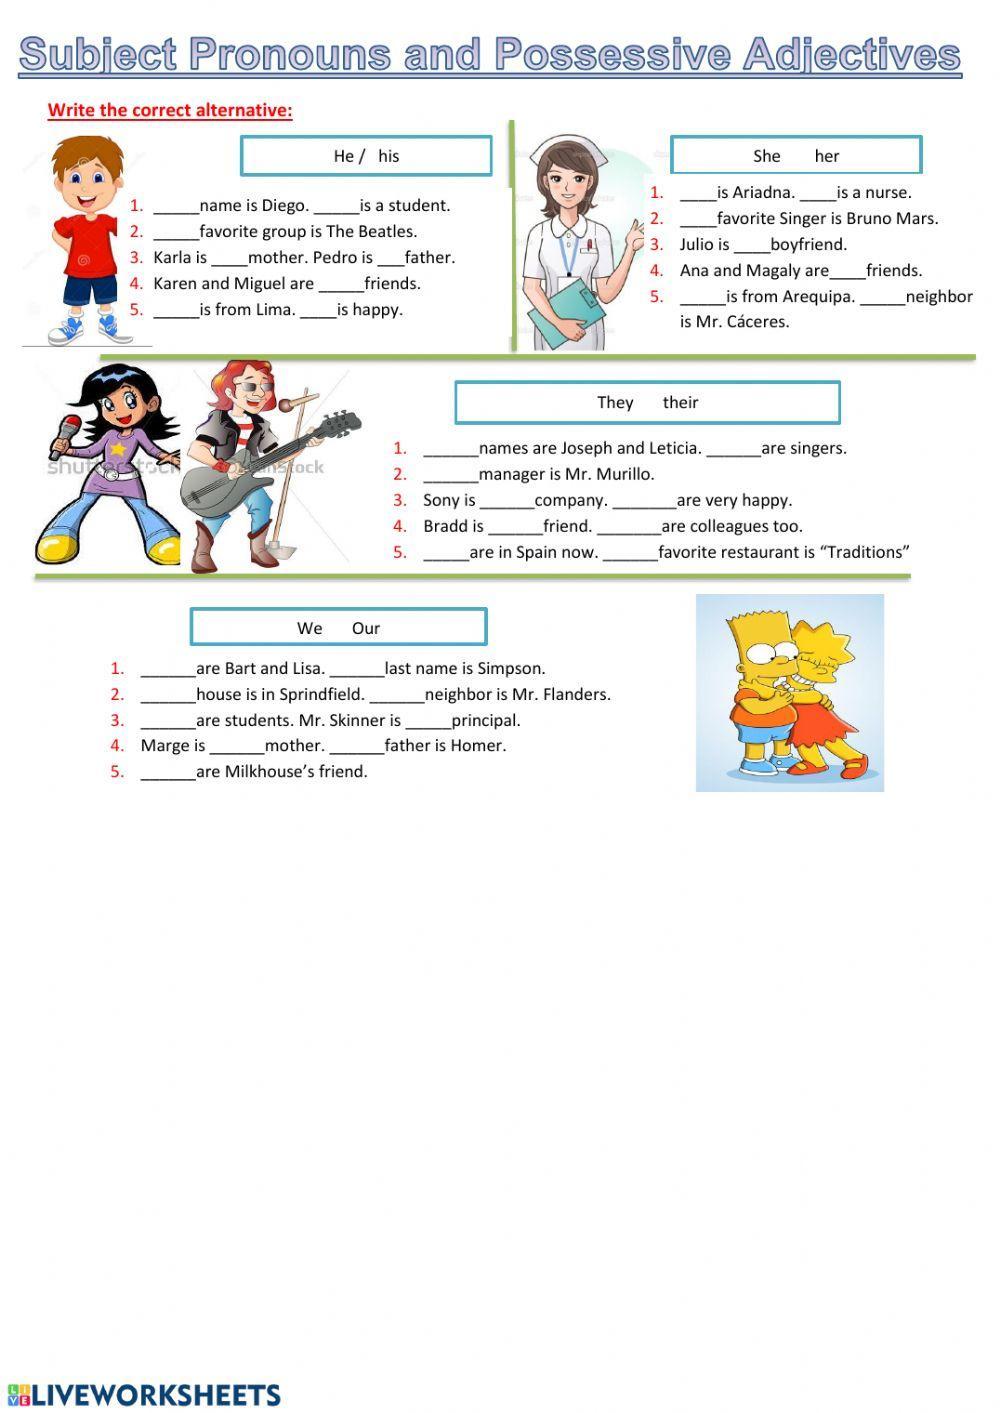 Possessive Adjectives and Subject Pronouns